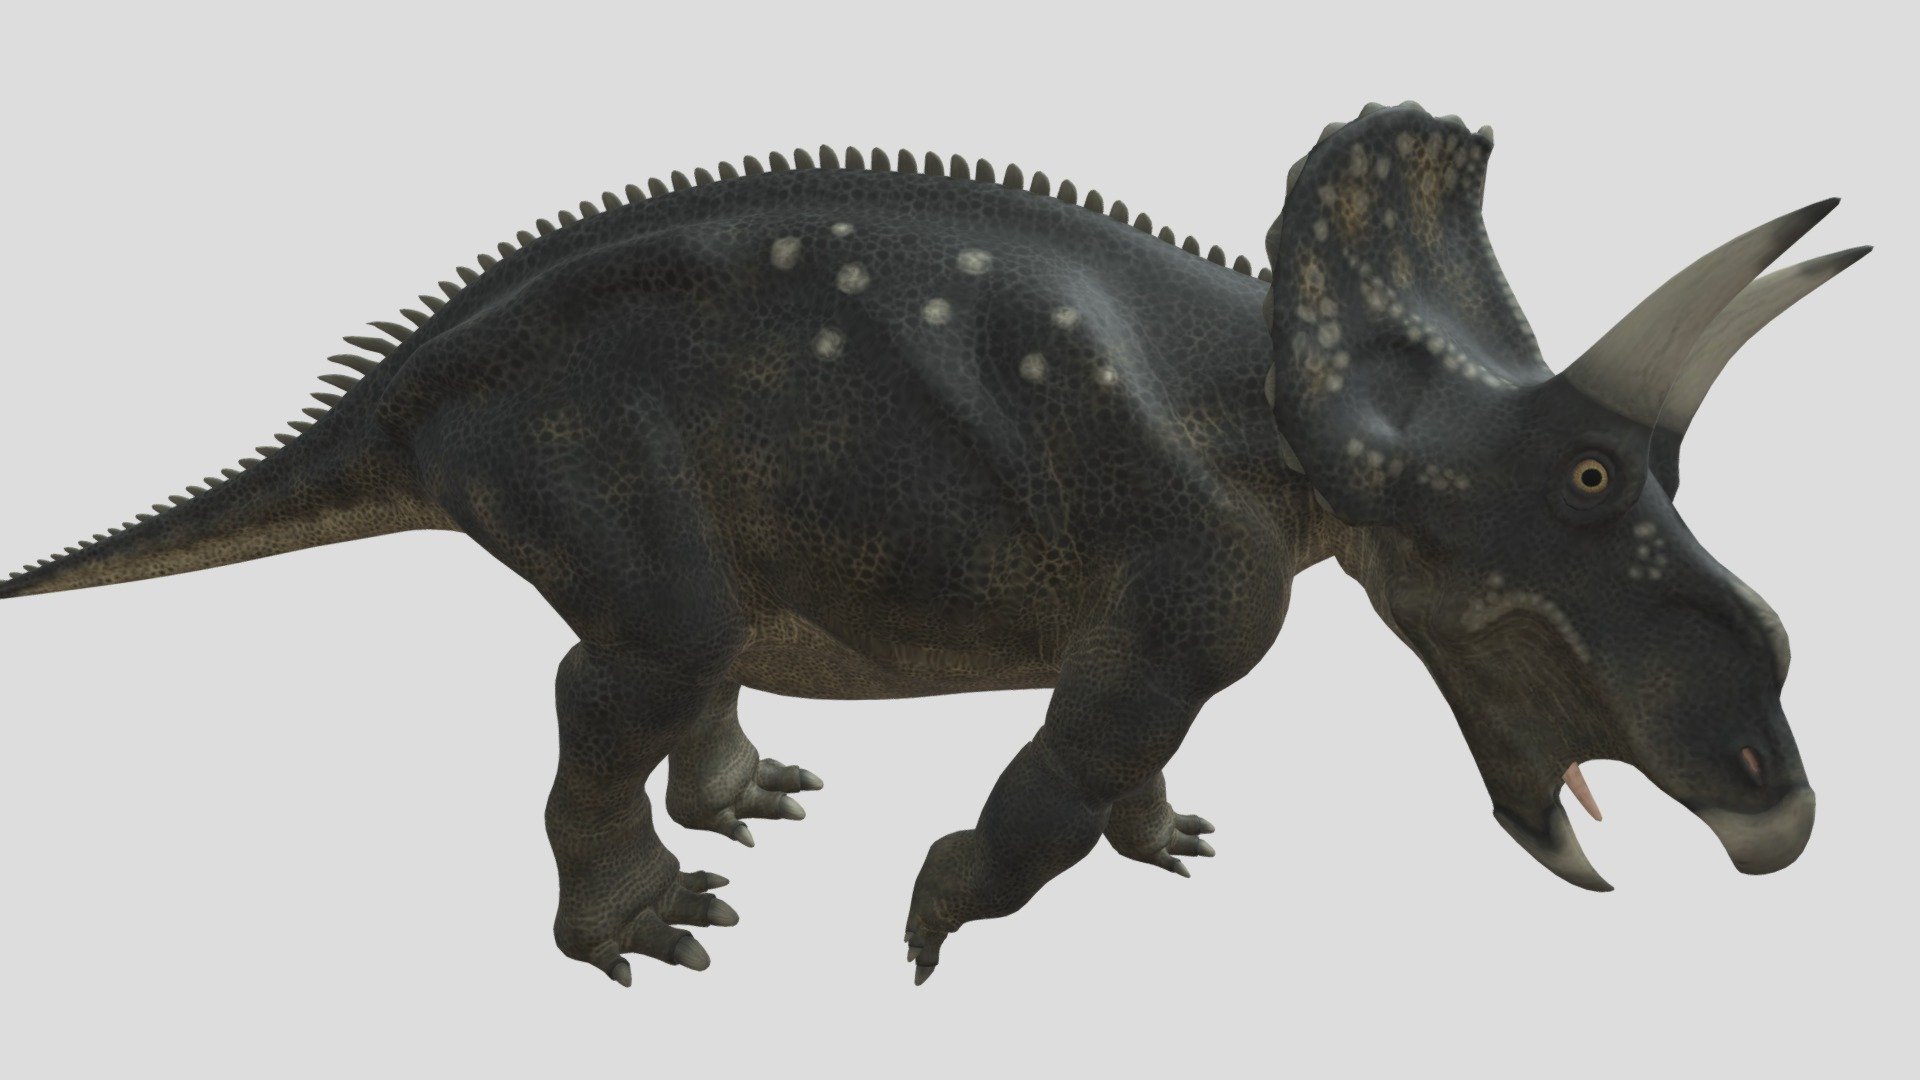 19-diceratops-facts